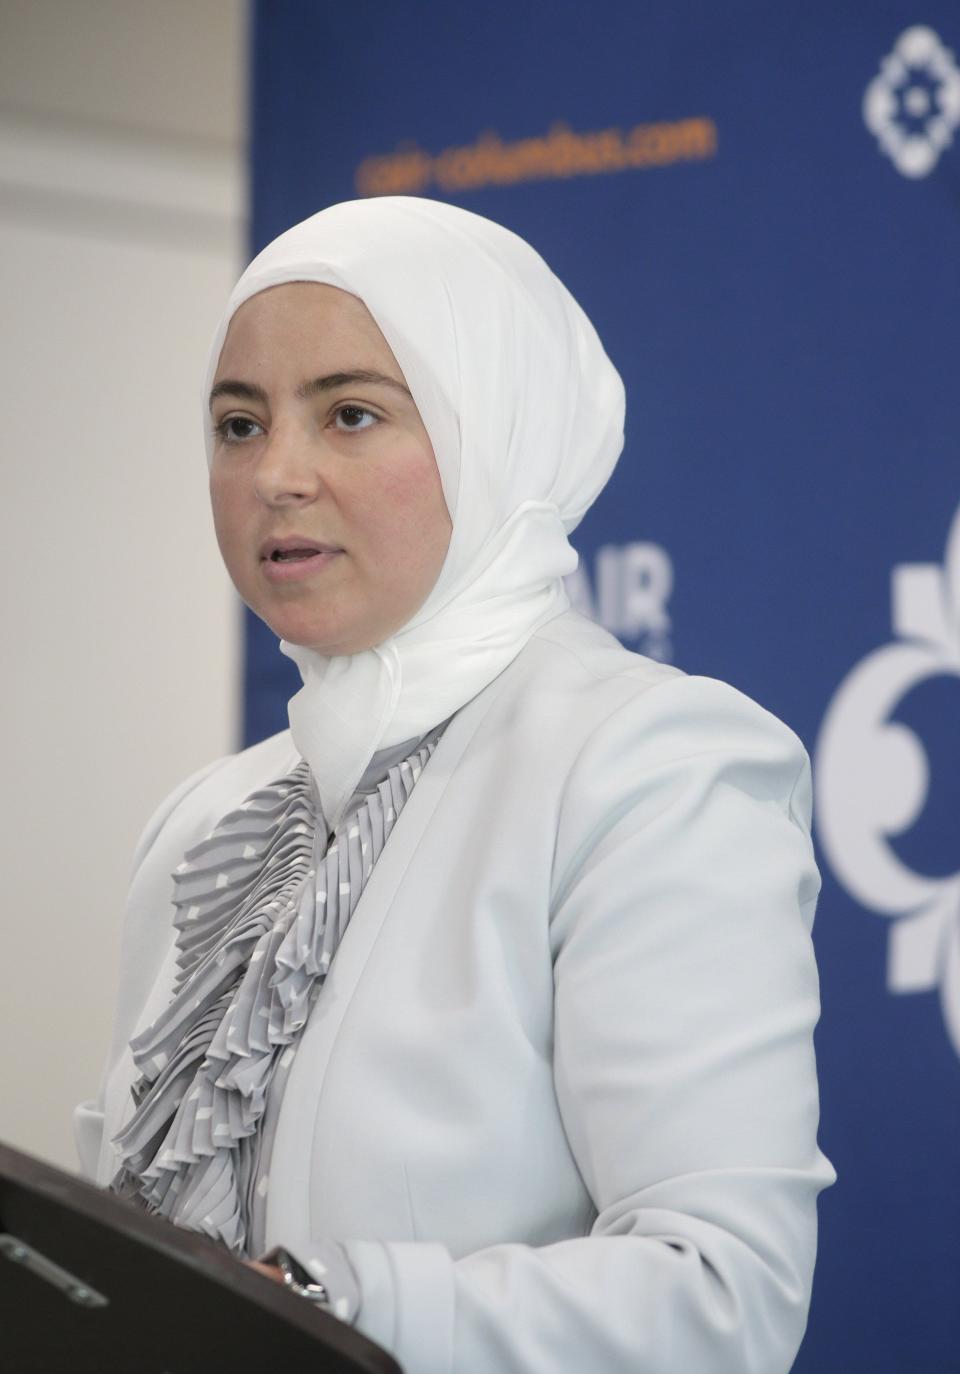 Amina Barhumi, now acting executive director of the Ohio chapter of the Council on American-Islamic Relations.